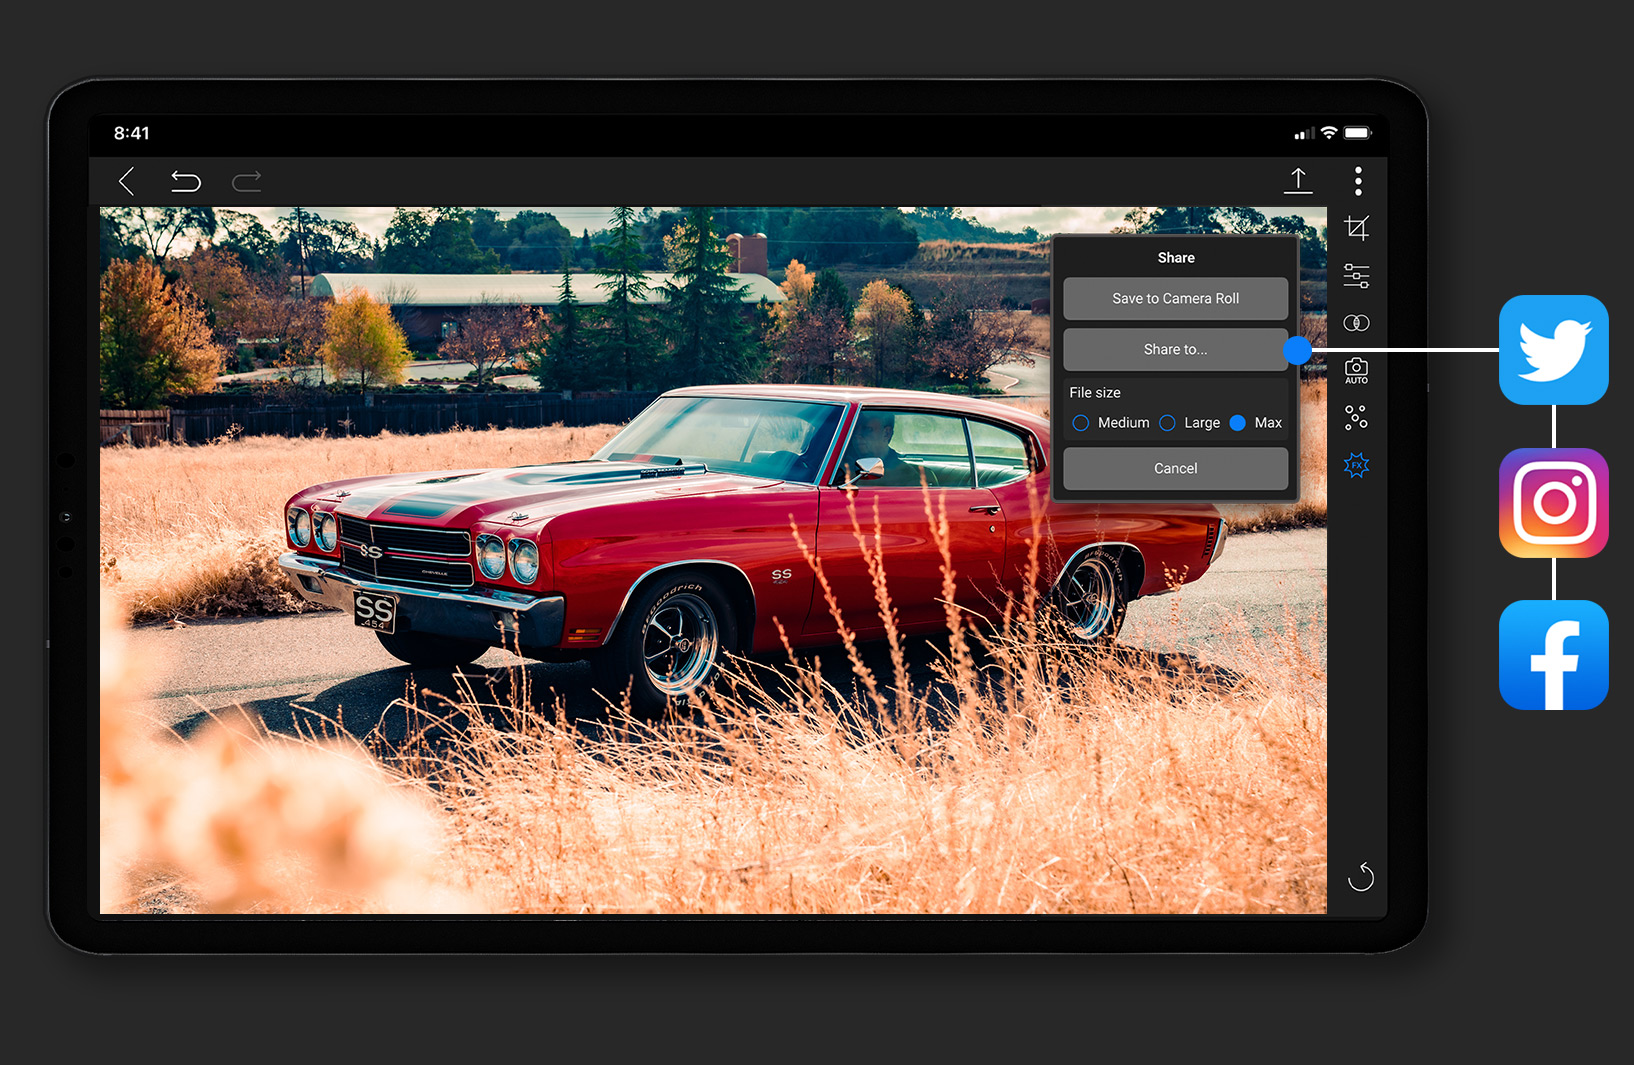 FotoWorks XL 2024 v24.0.0 download the new for apple